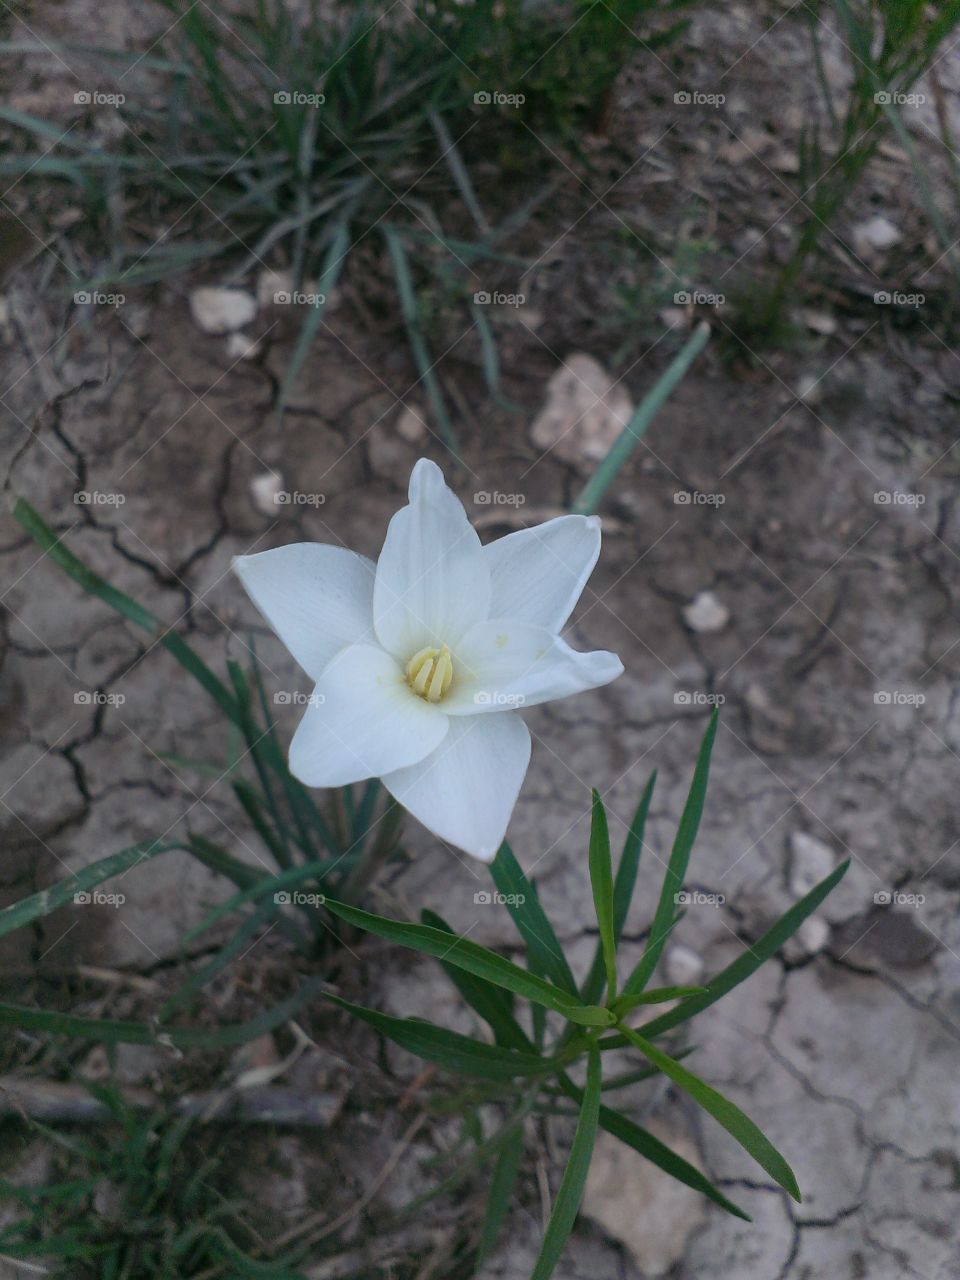 desert flower. something that was in my back yard that day